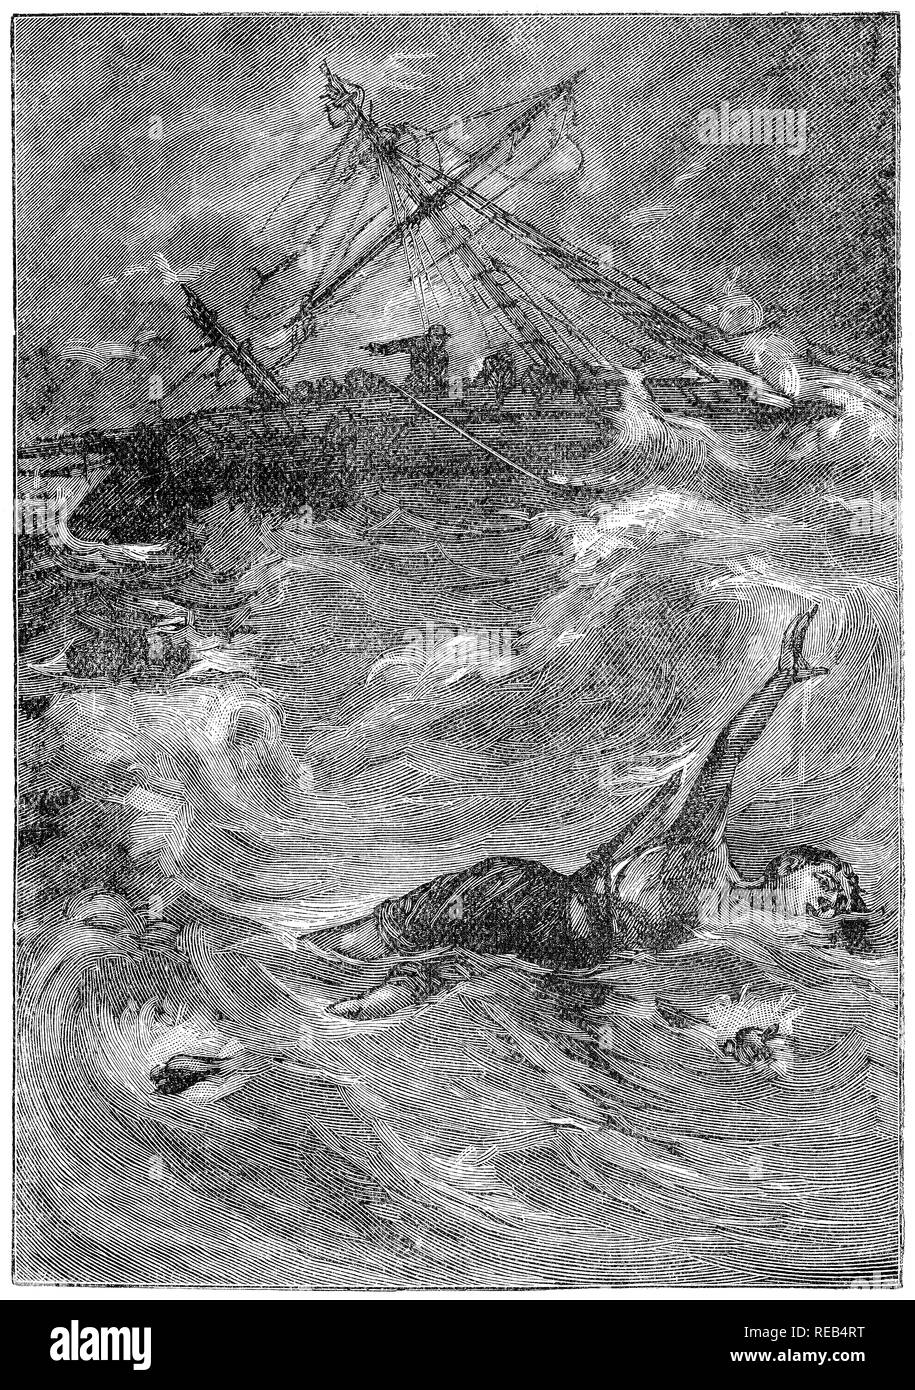 1988 vintage engraving of  storm at sea with a man overboard from a sailing ship. Stock Photo